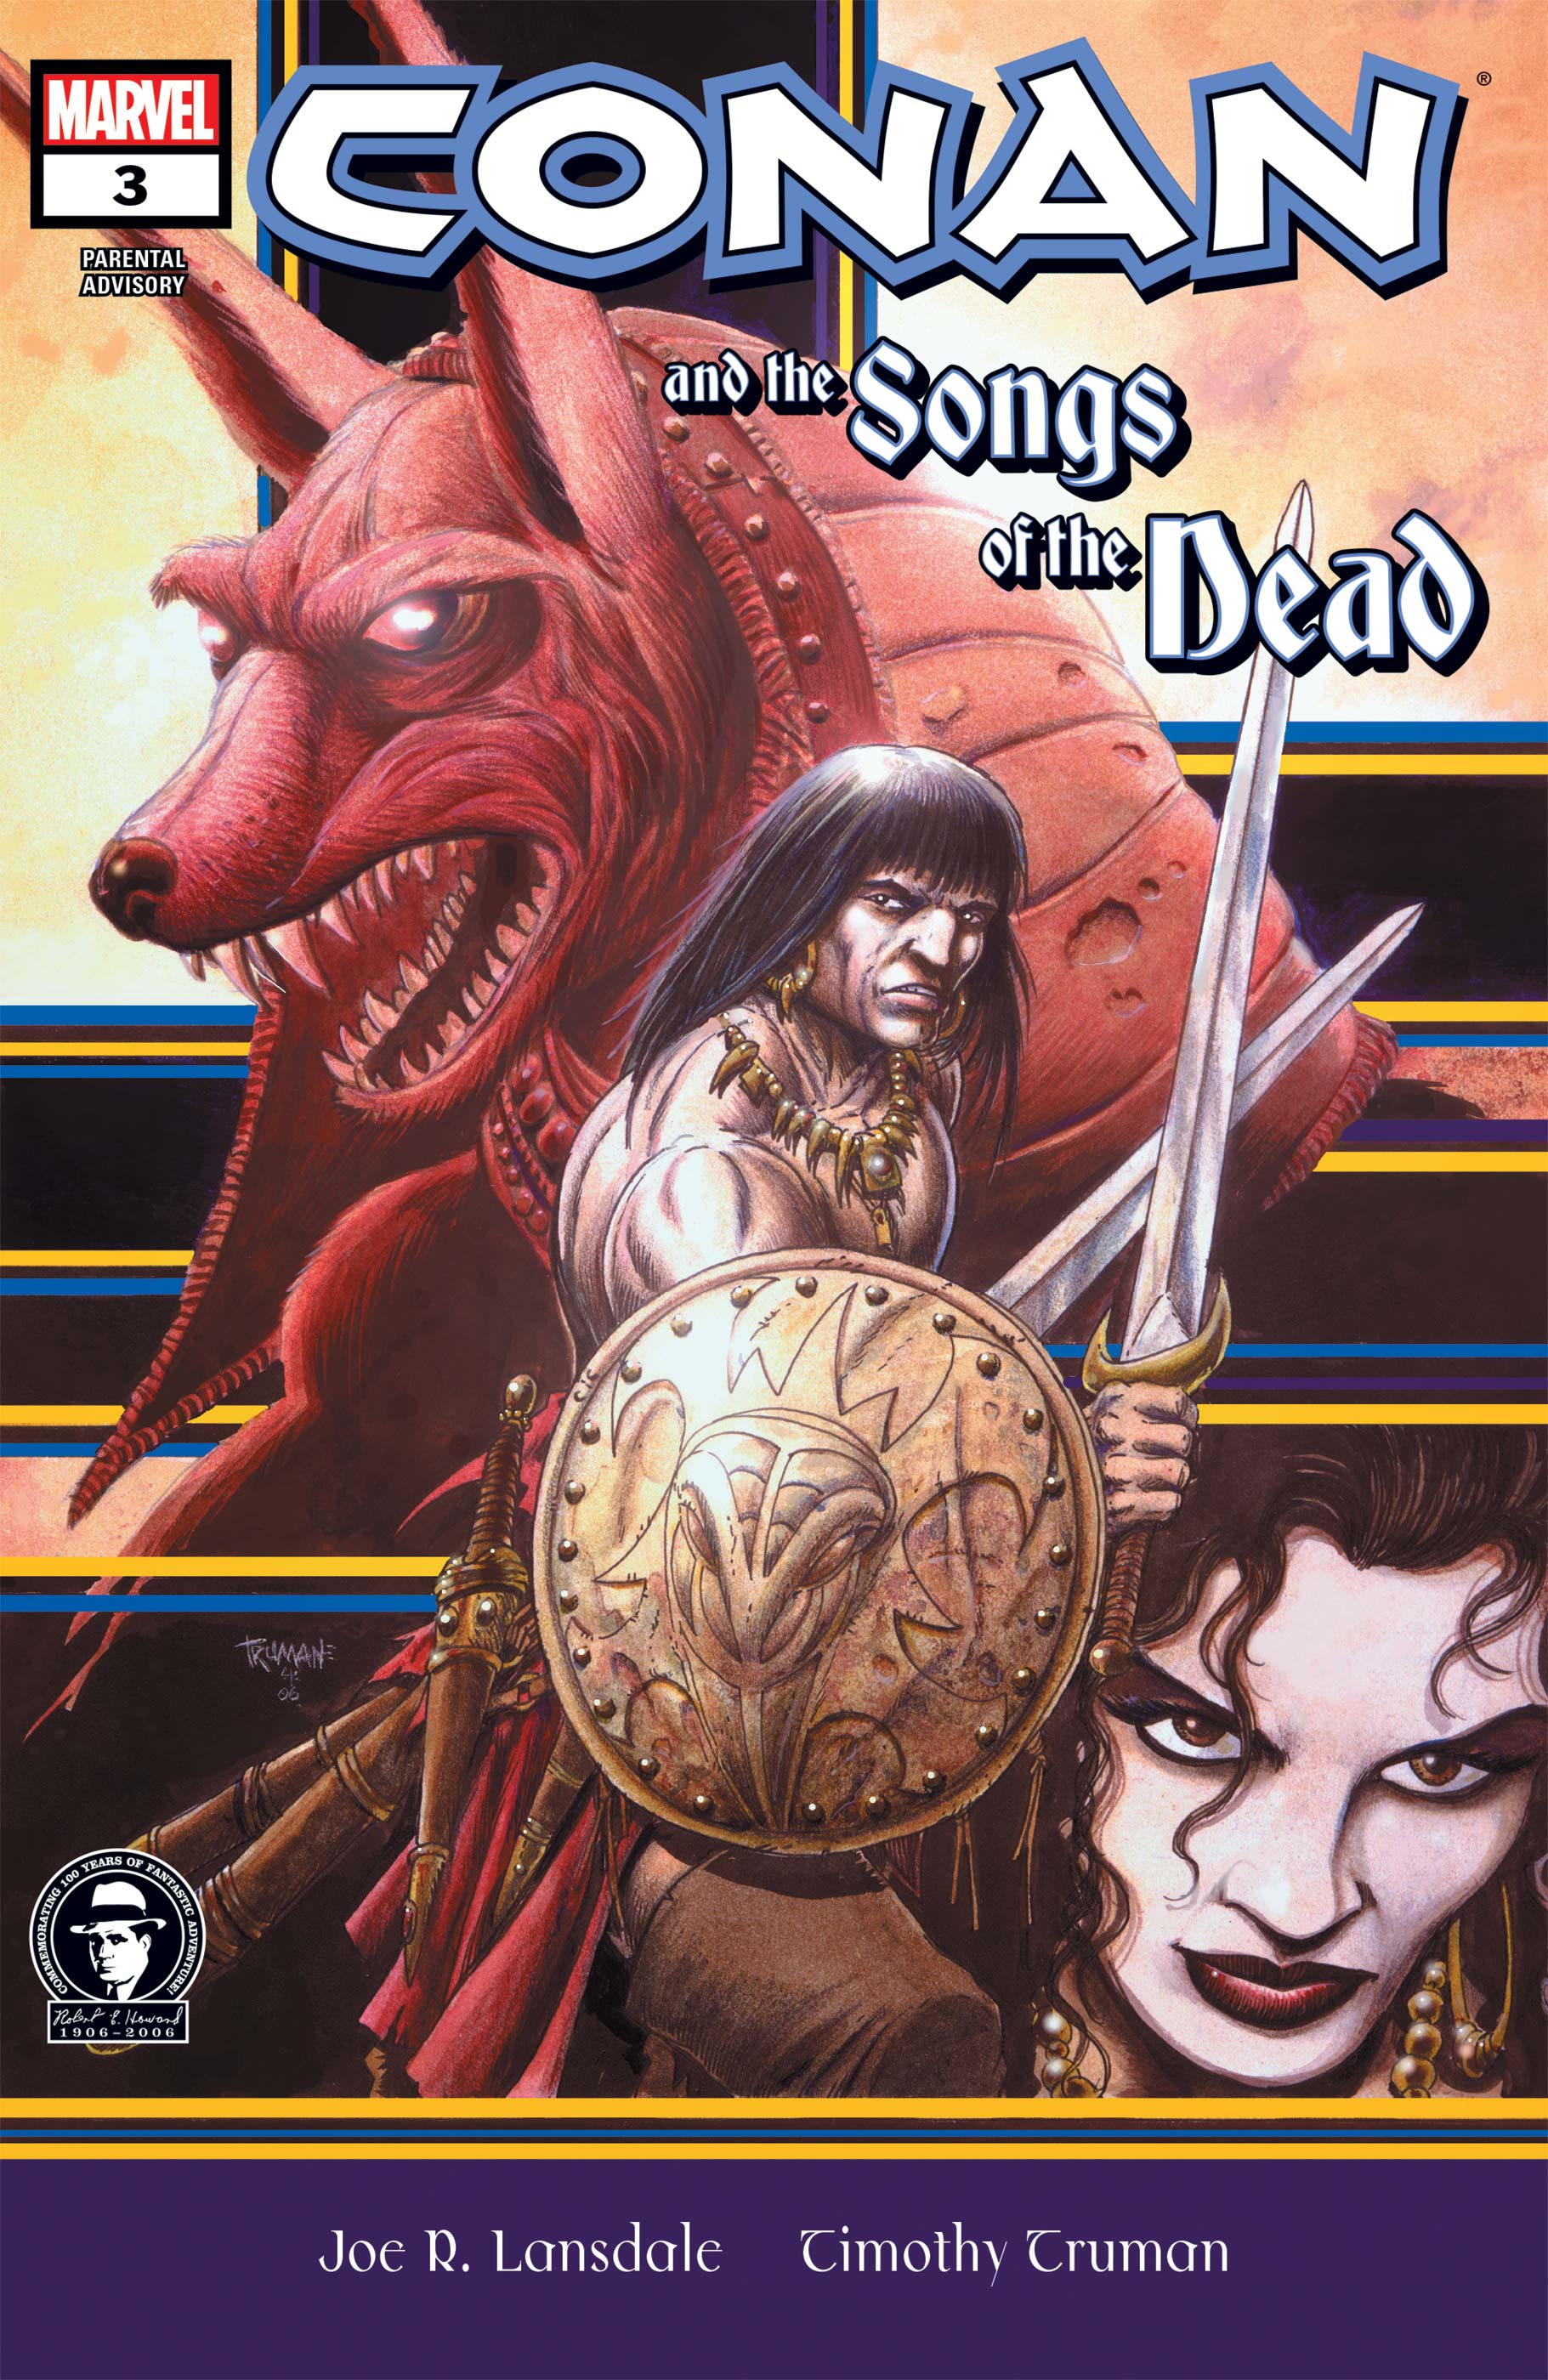 Conan and the Songs of the Dead (2006) #3